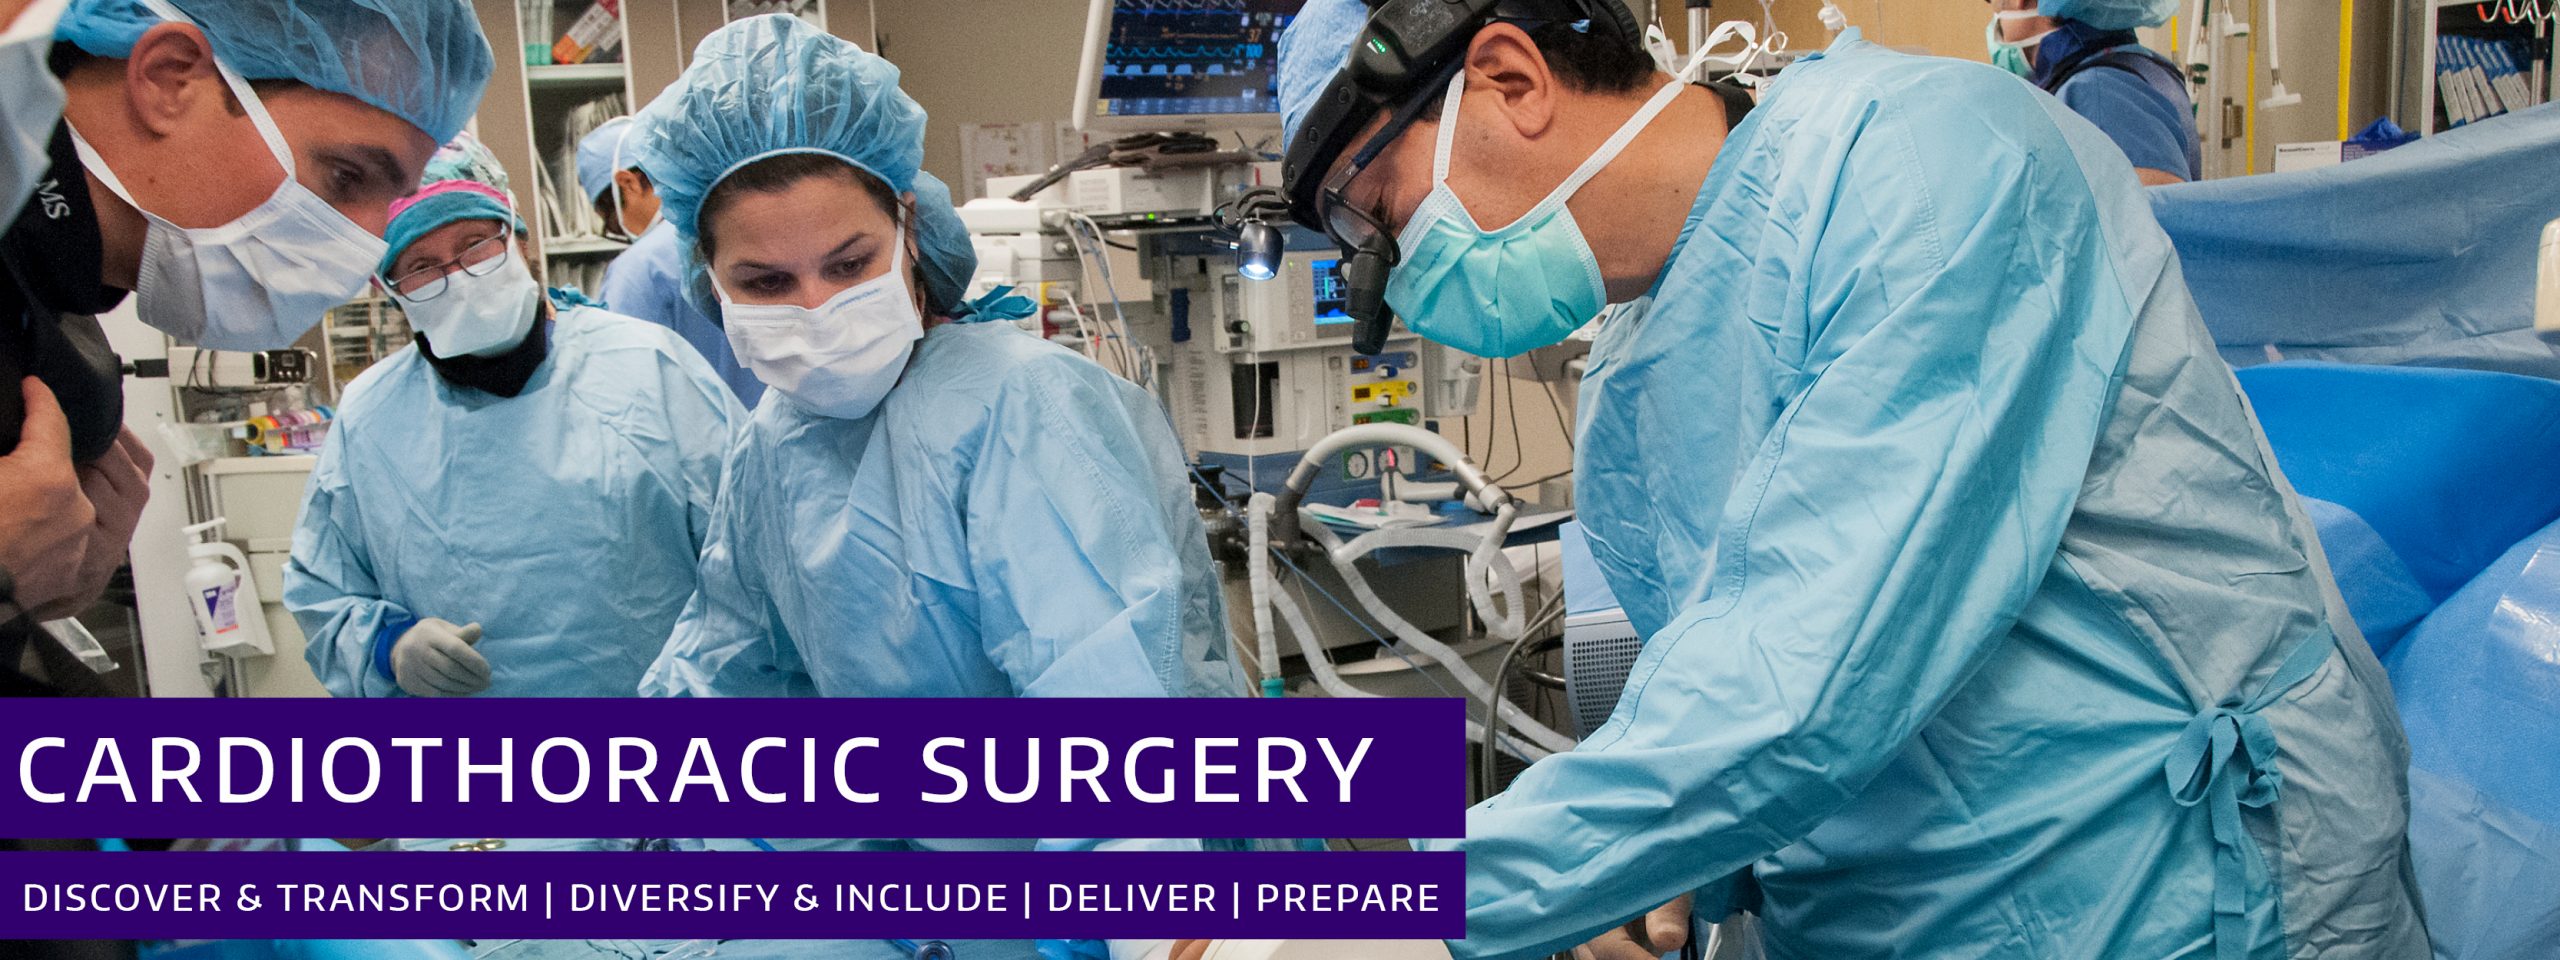 Department of Surgery Division of Cardiothoracic Surgery Header Image